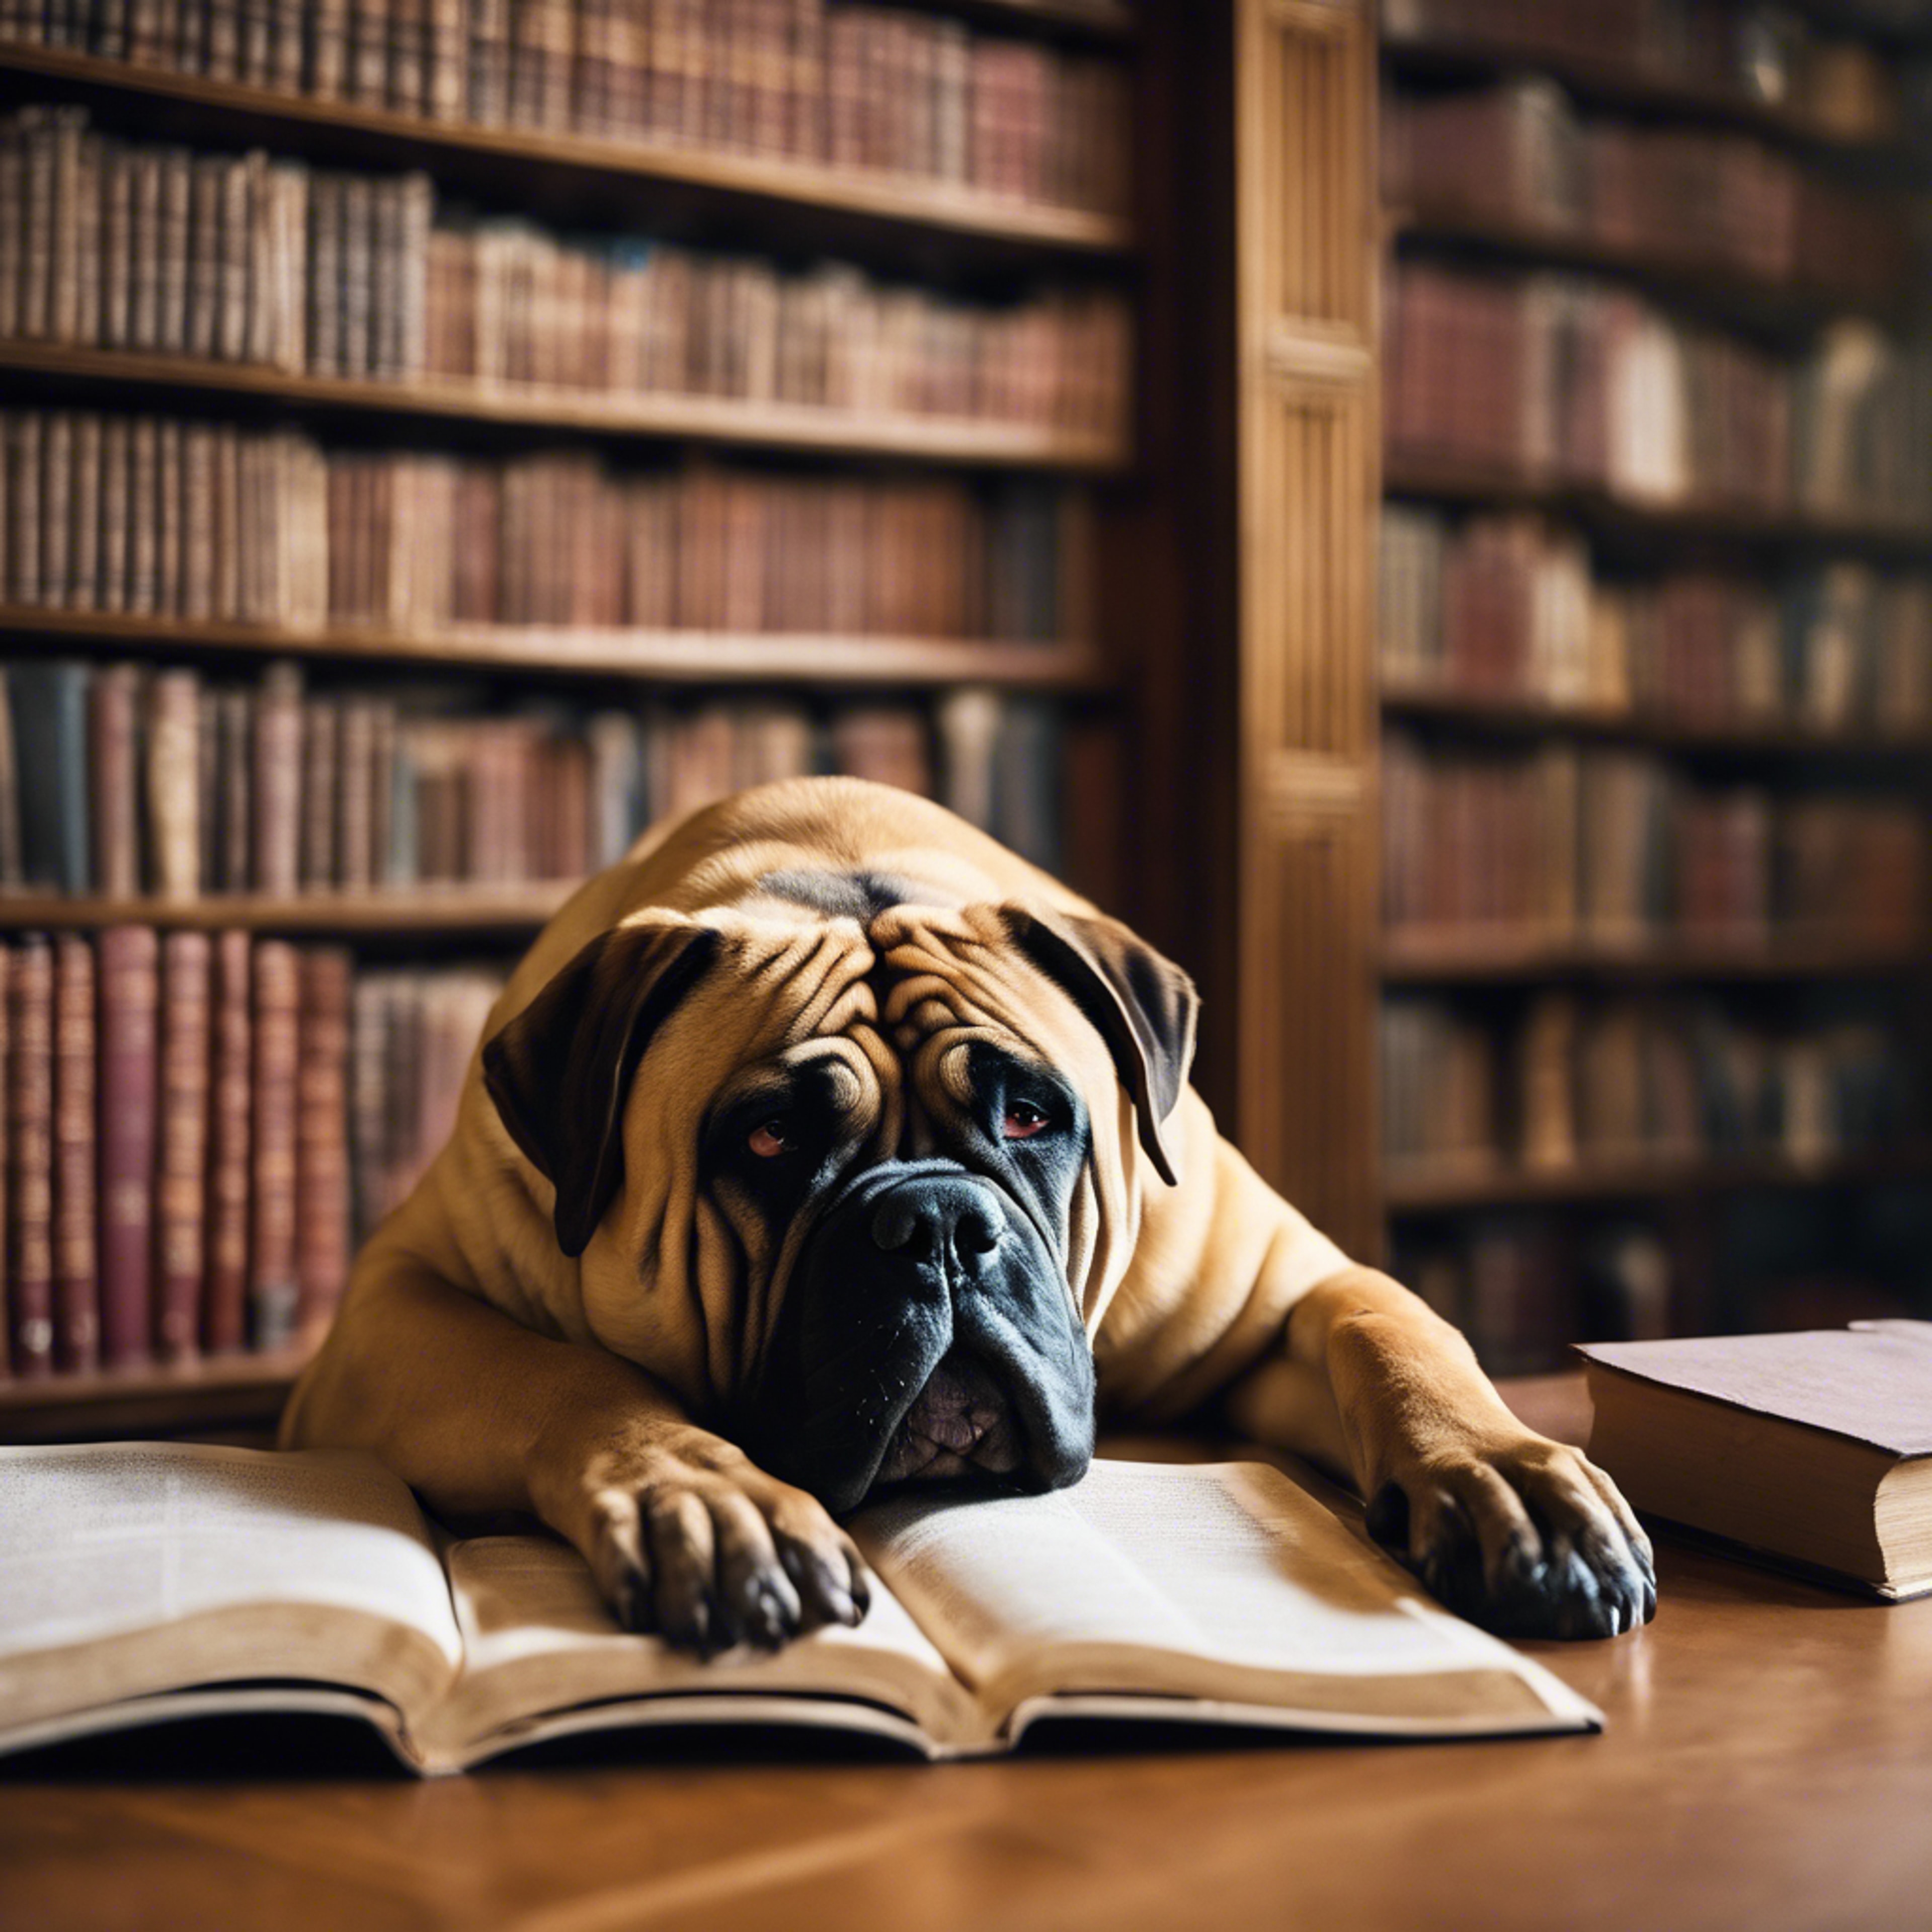 A Bullmastiff snoozing happily in an old English library, a burning fireplace and shelves of books around. Wallpaper[37bc2afe35d449908a17]